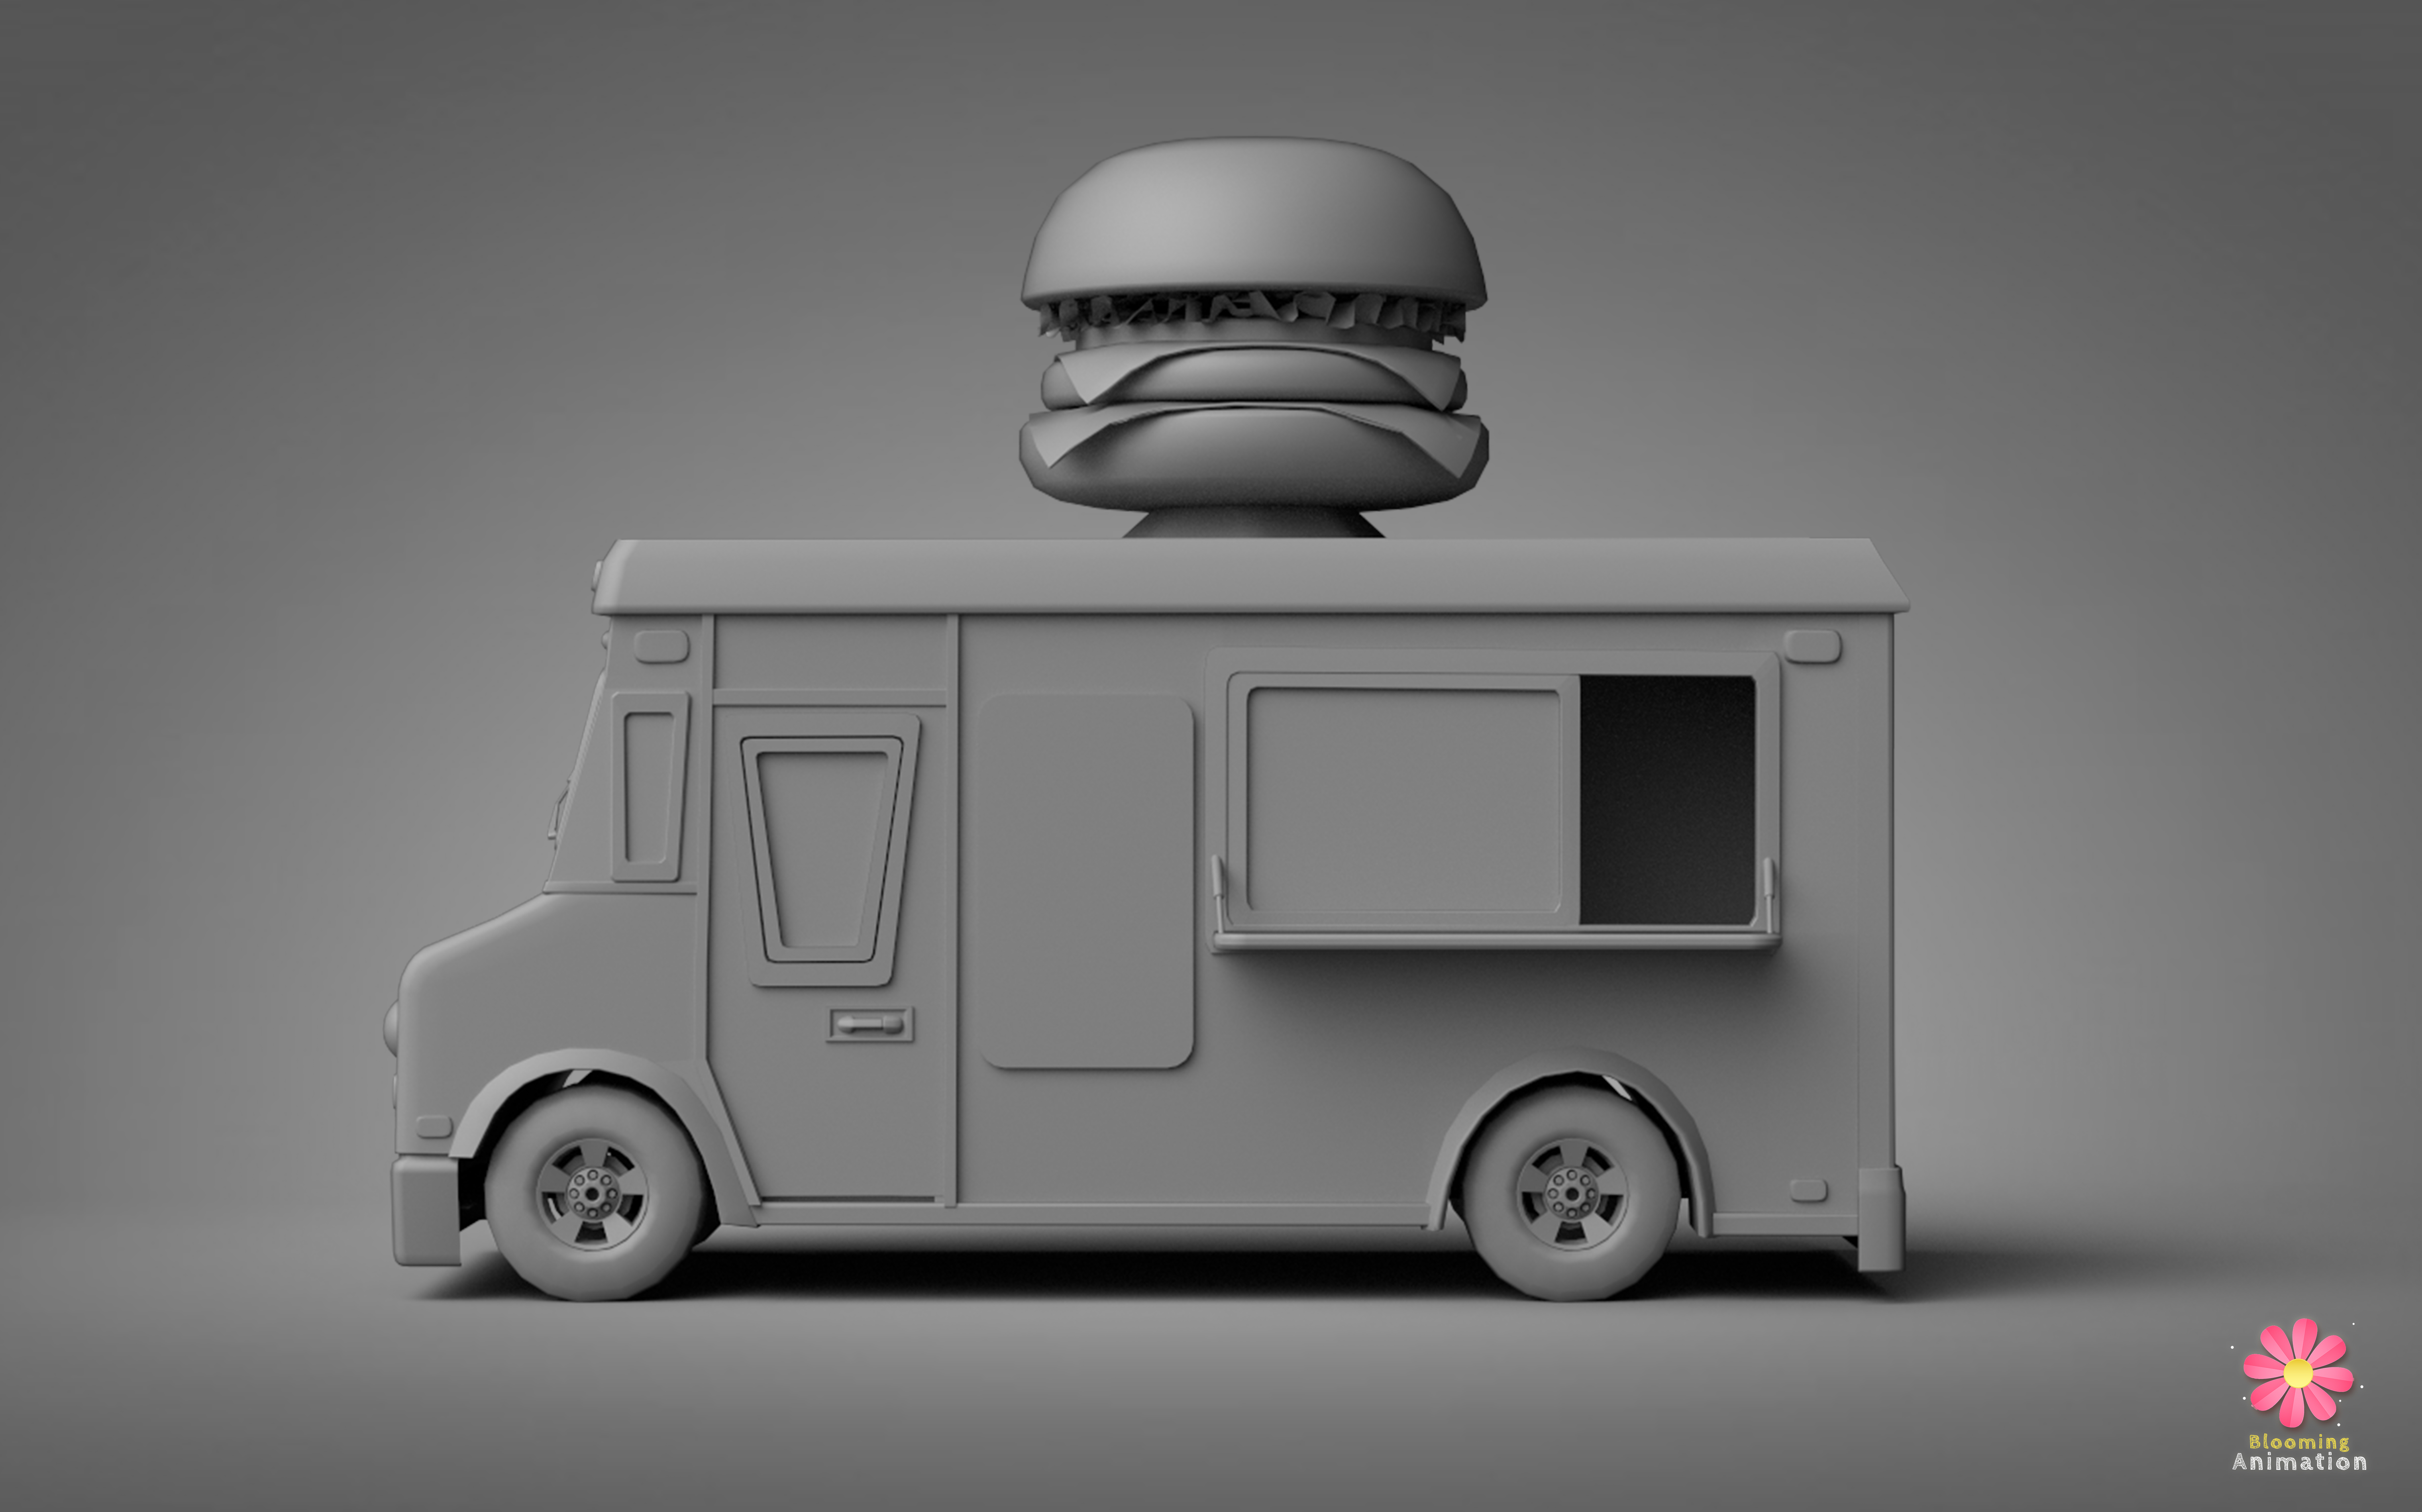 Burger Truck || Low-poly Game Ready Model